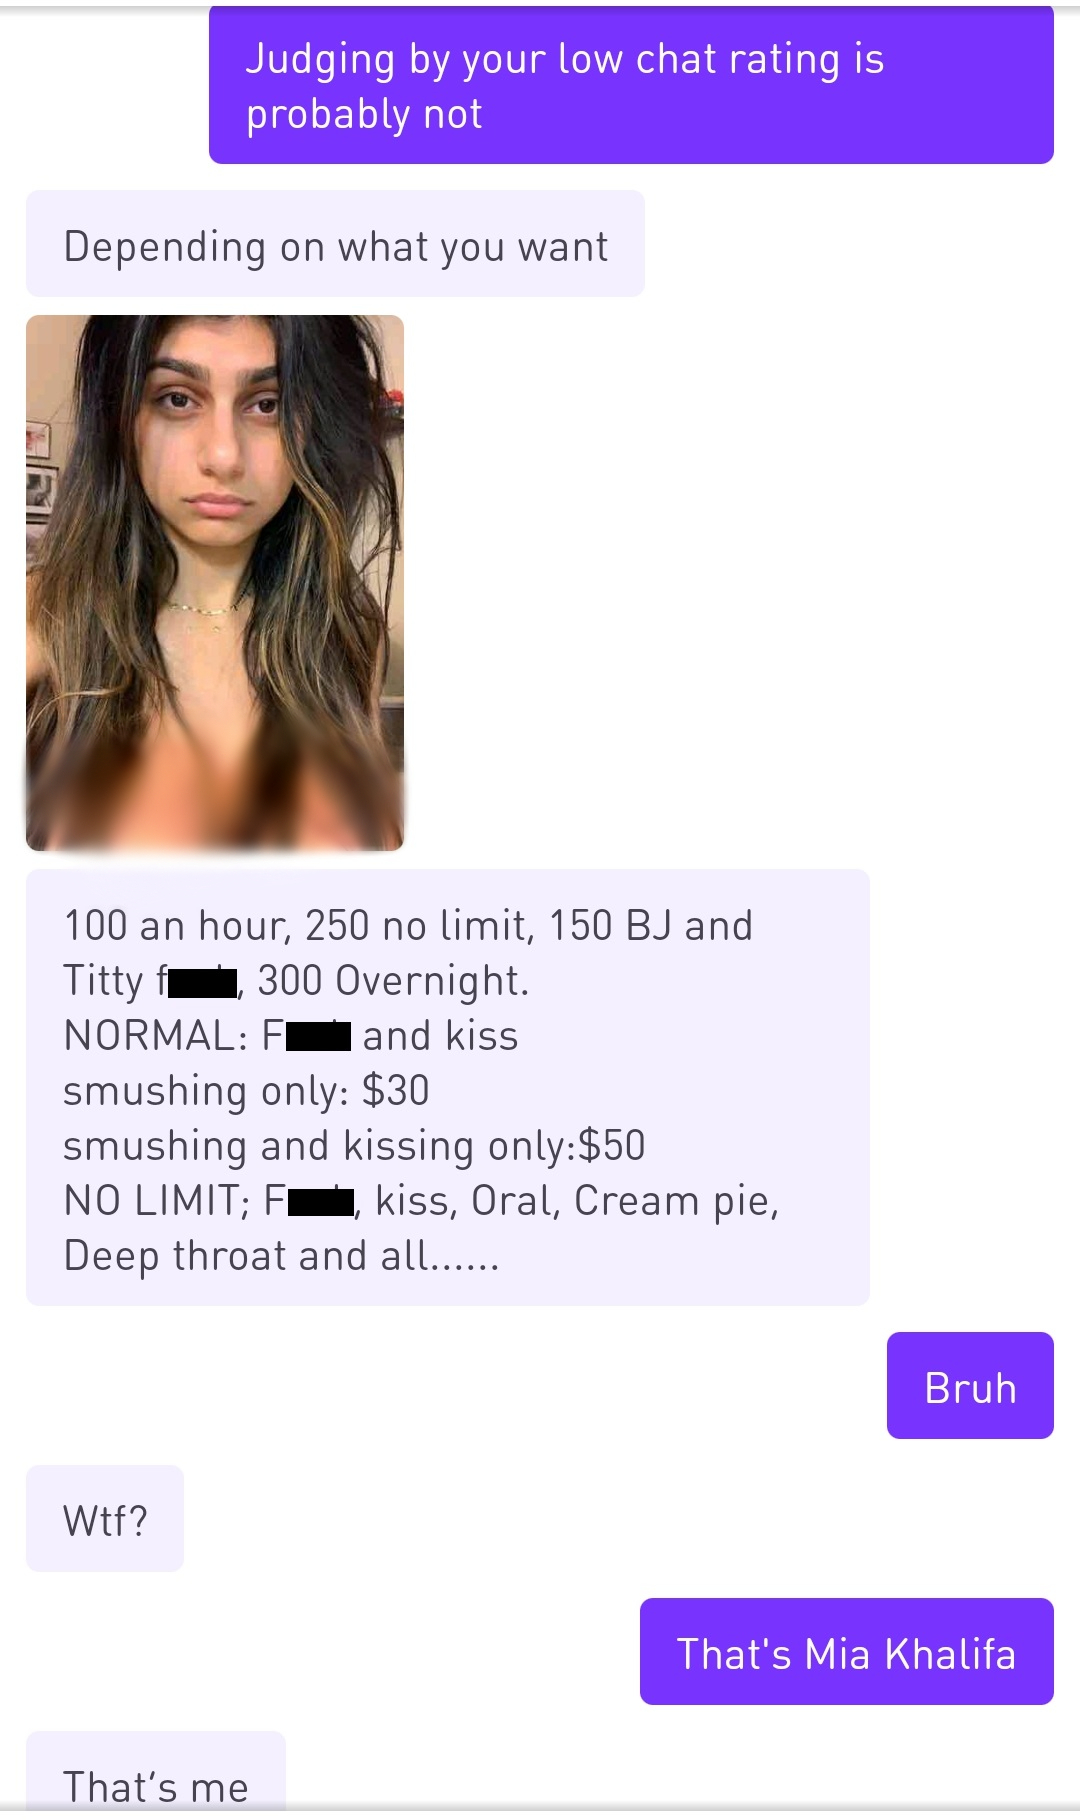 internet liars called out - media - Judging by your low chat rating is probably not Depending on what you want 100 an hour, 250 no limit, 150 Bj and Titty 300 Overnight Normal Fl and kiss smushing only $30 smushing and kissing only$50 No Limit; Fkiss, Ora